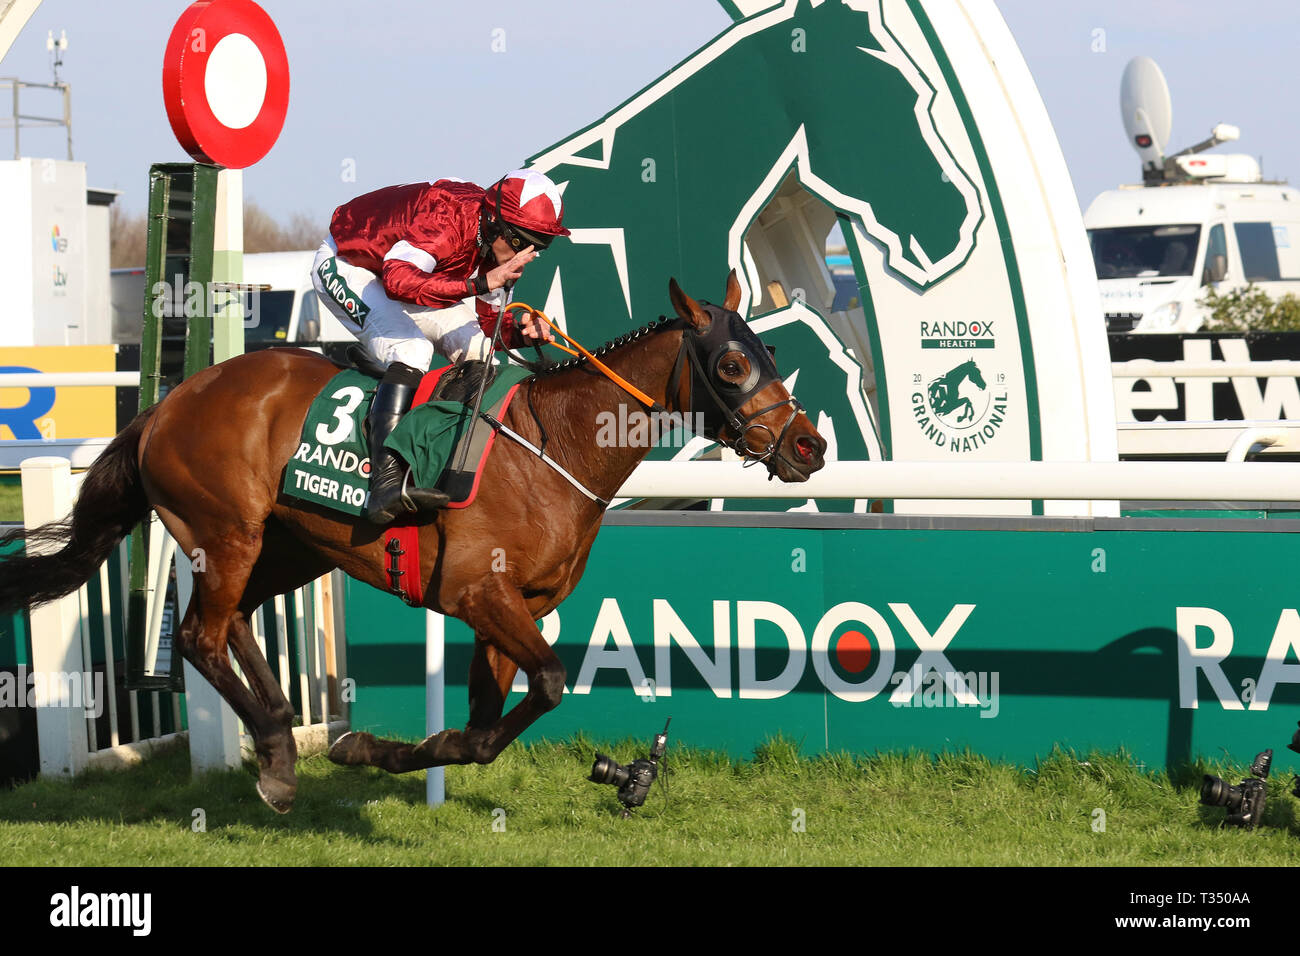 AINTREE, Liverpool, UK. 6th Apr, 2019. Tiger Roll winner of the 2019 Randox Grand National ridden by D N Russell. He becomes the first horse to since Red Rum 45 years ago to win the event race back-to-back. 40 runners, 30 fences and more than four-and-a-quarter miles, the National is the ultimate test for horses and riders. Stock Photo